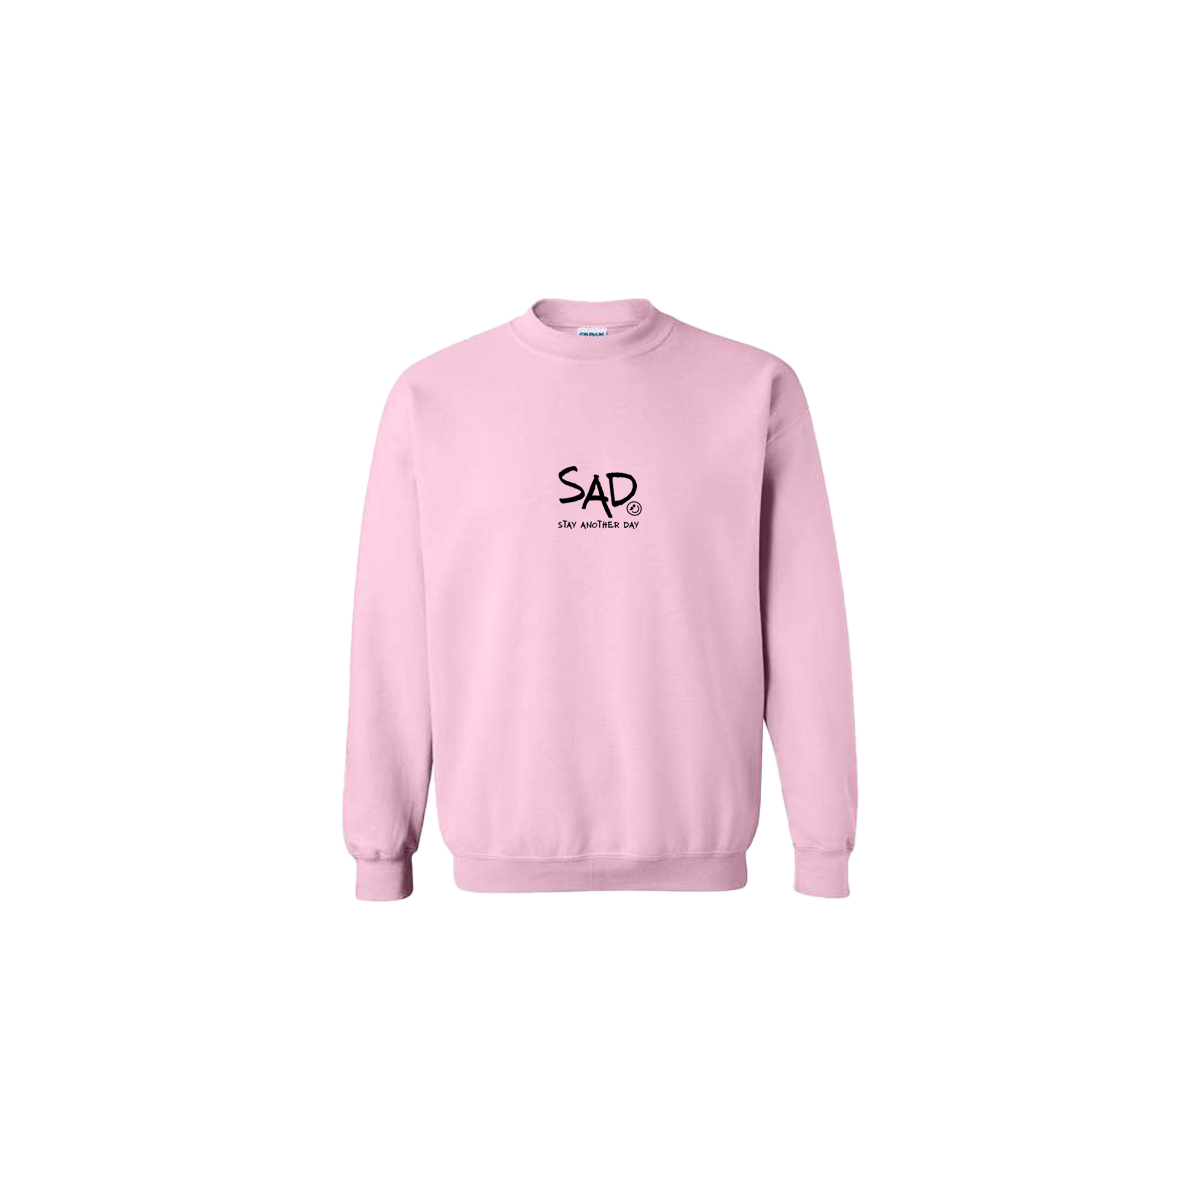 Stay Another Day - SAD Logo Embroidered Light Pink Crewneck - Mental Health Awareness Clothing